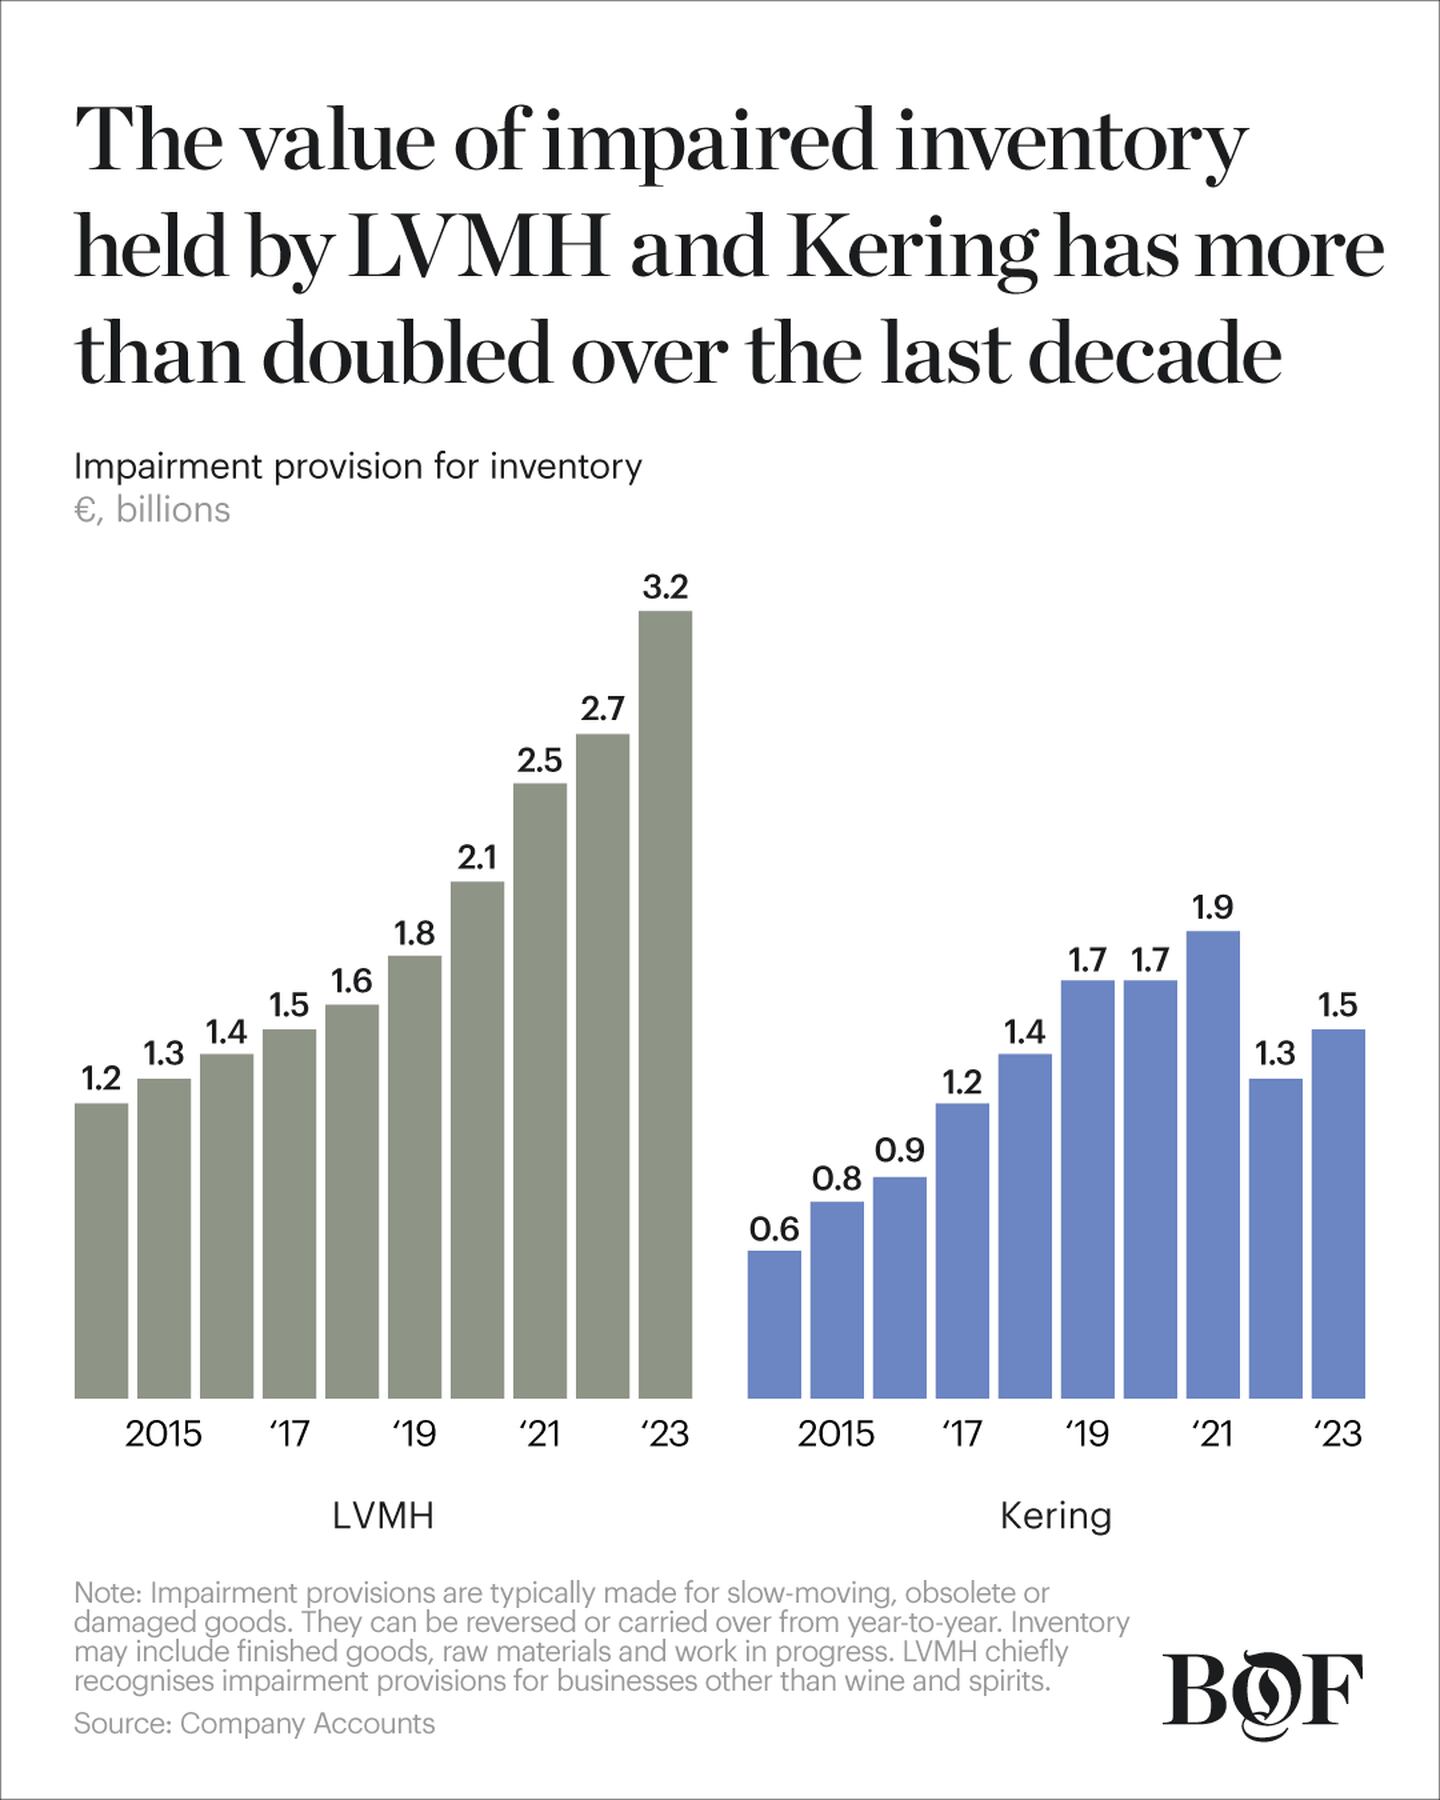 Chart showing that the value of impaired inventory held by LVMH and Kering more than doubled over the last decade.